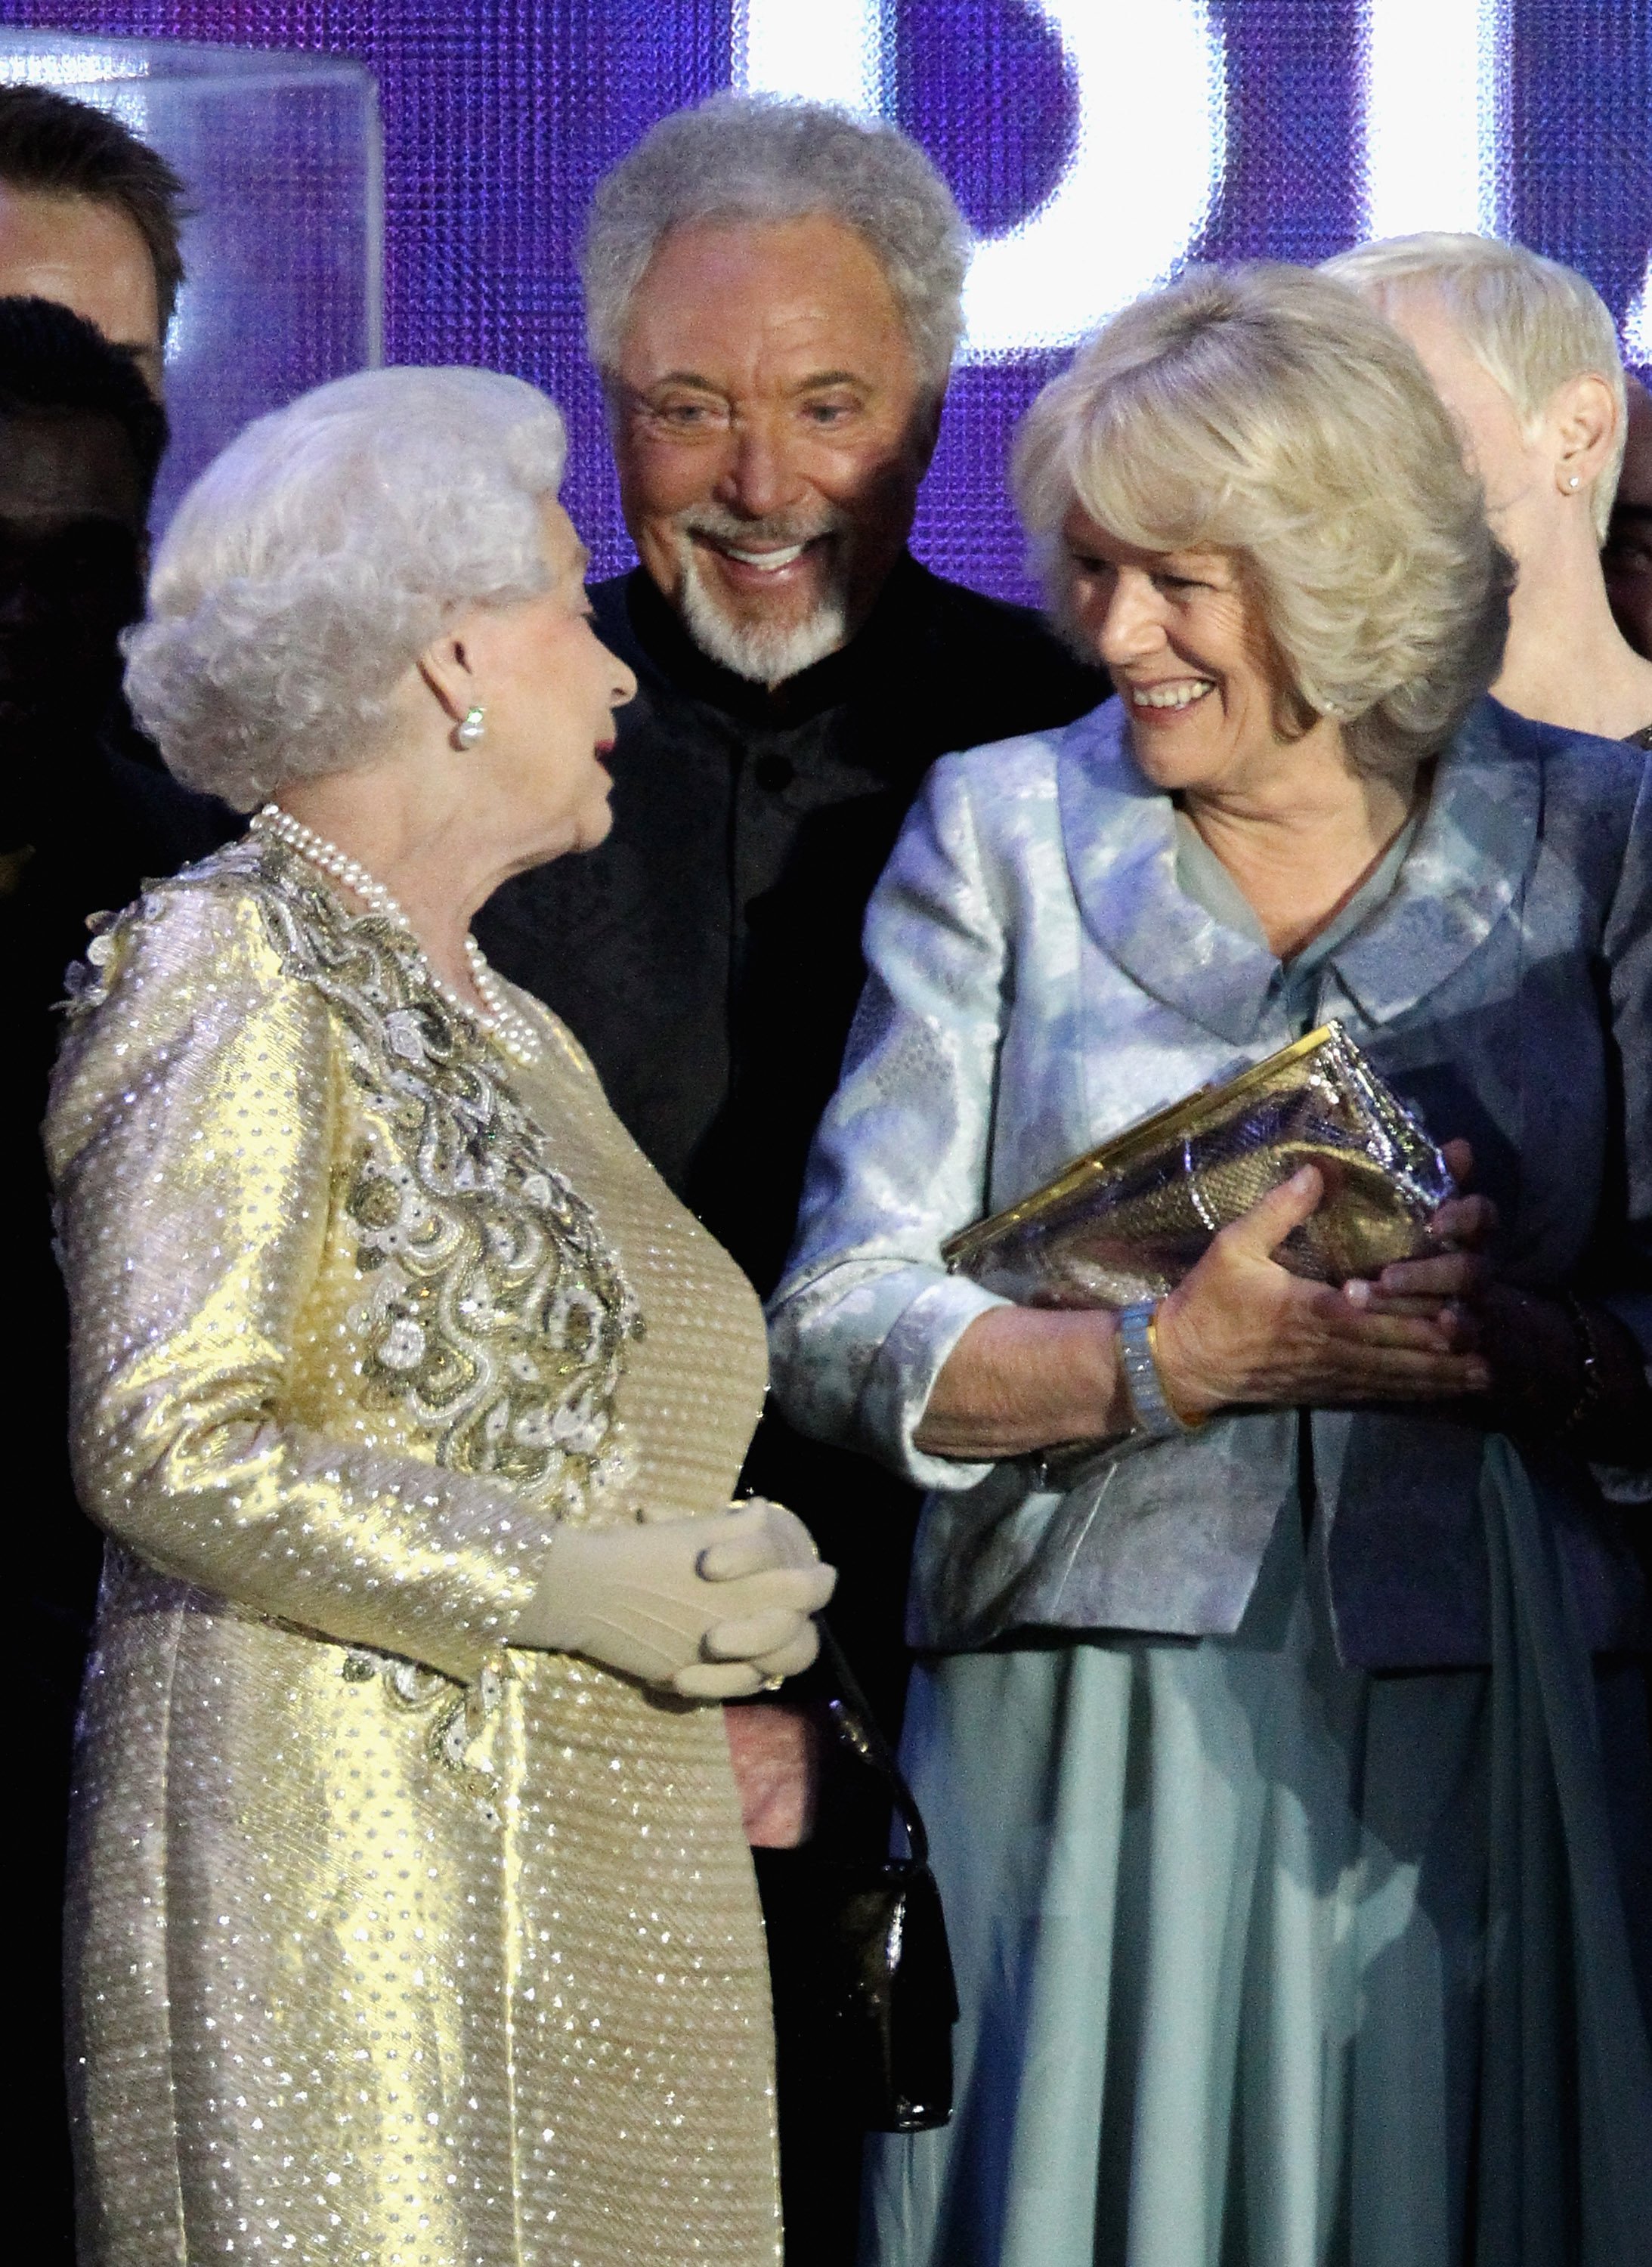 Queen Elizabeth, Jones and the then-Duchess of Cornwall during the Diamond Jubilee concert at Buckingham Palace in 2012 in London, England. Photo: Getty Images